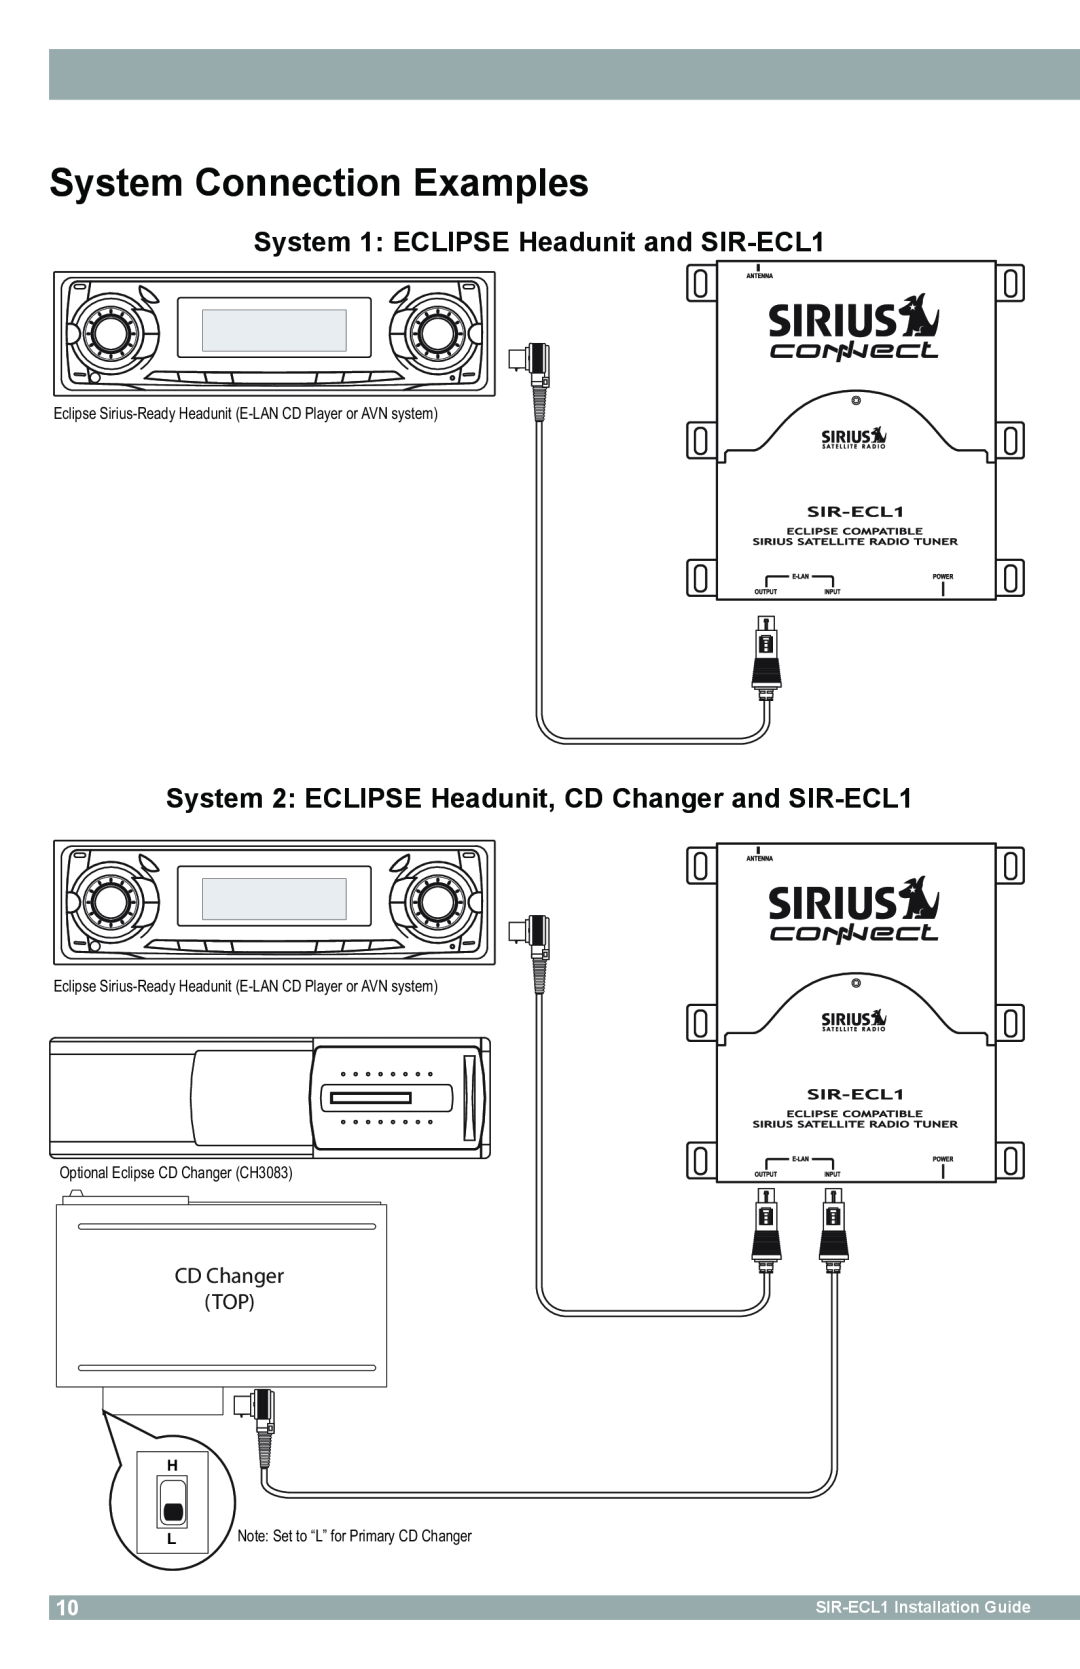 Sirius Satellite Radio SIR-ECL1 manual System Connection Examples, CD Changer TOP, Optional Eclipse CD Changer CH3083 